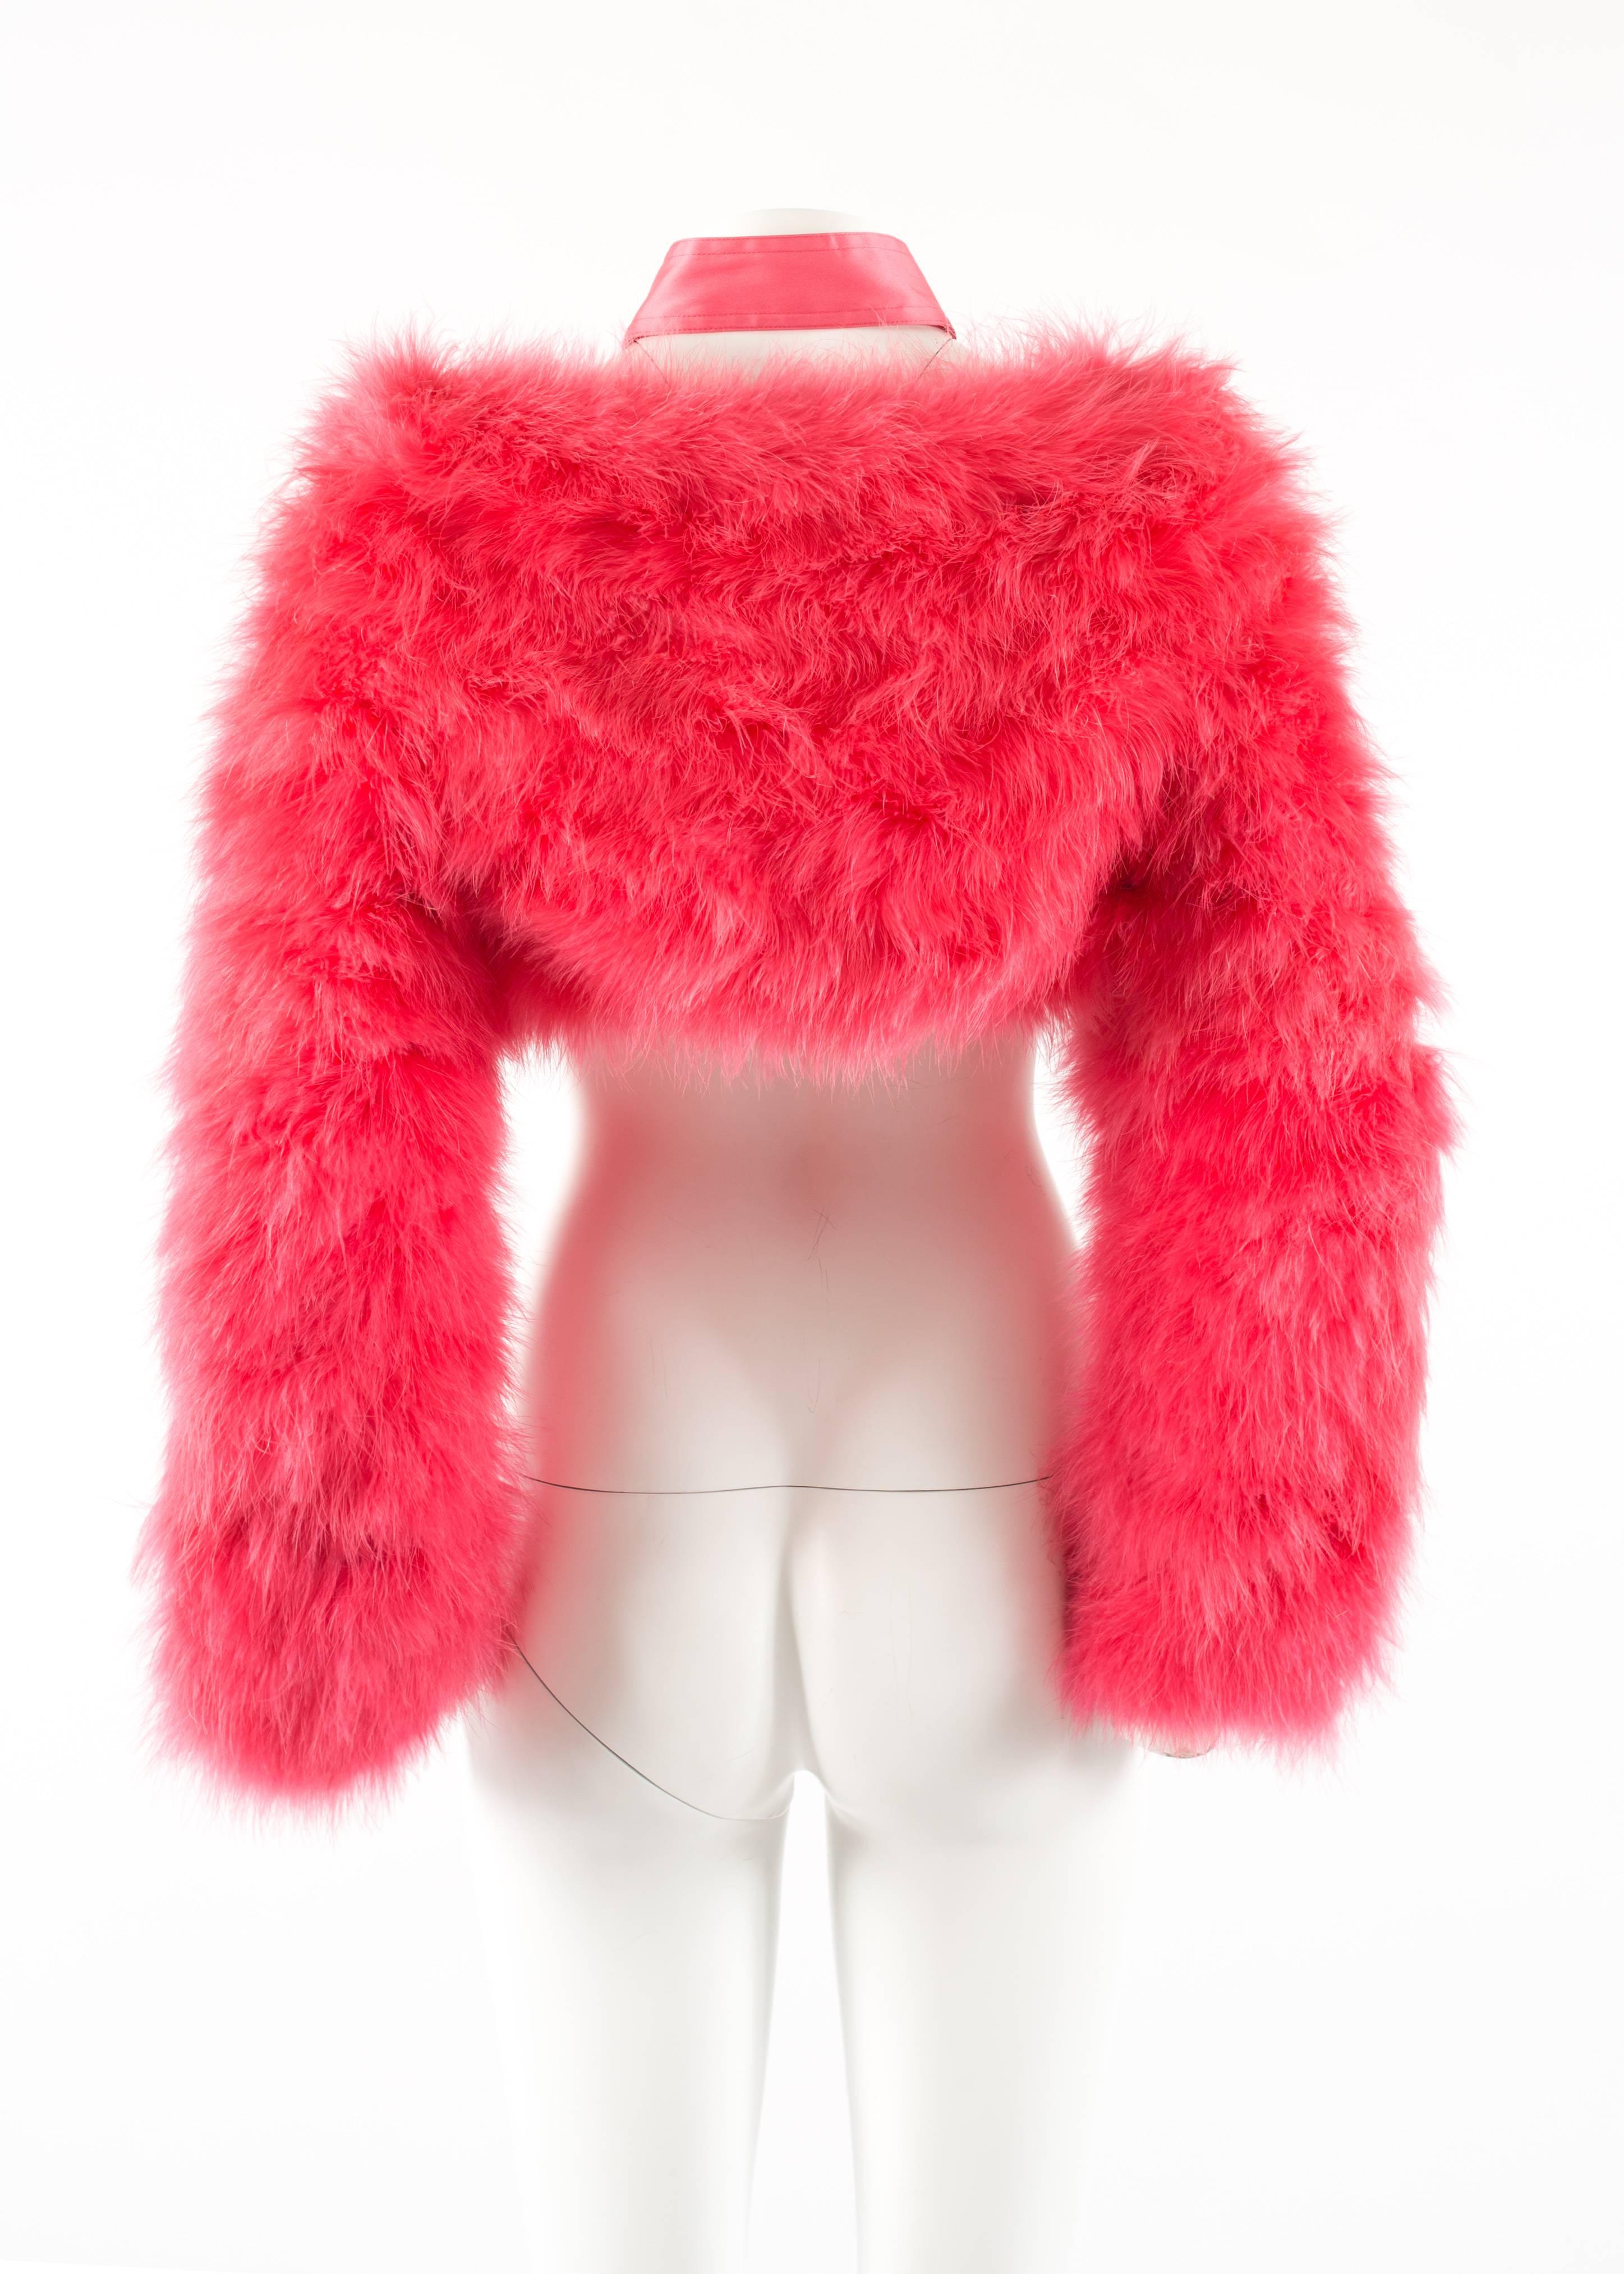 Tom Ford for Gucci Spring-Summer 2004 hot pink marabou bolero jacket  In Excellent Condition In London, GB